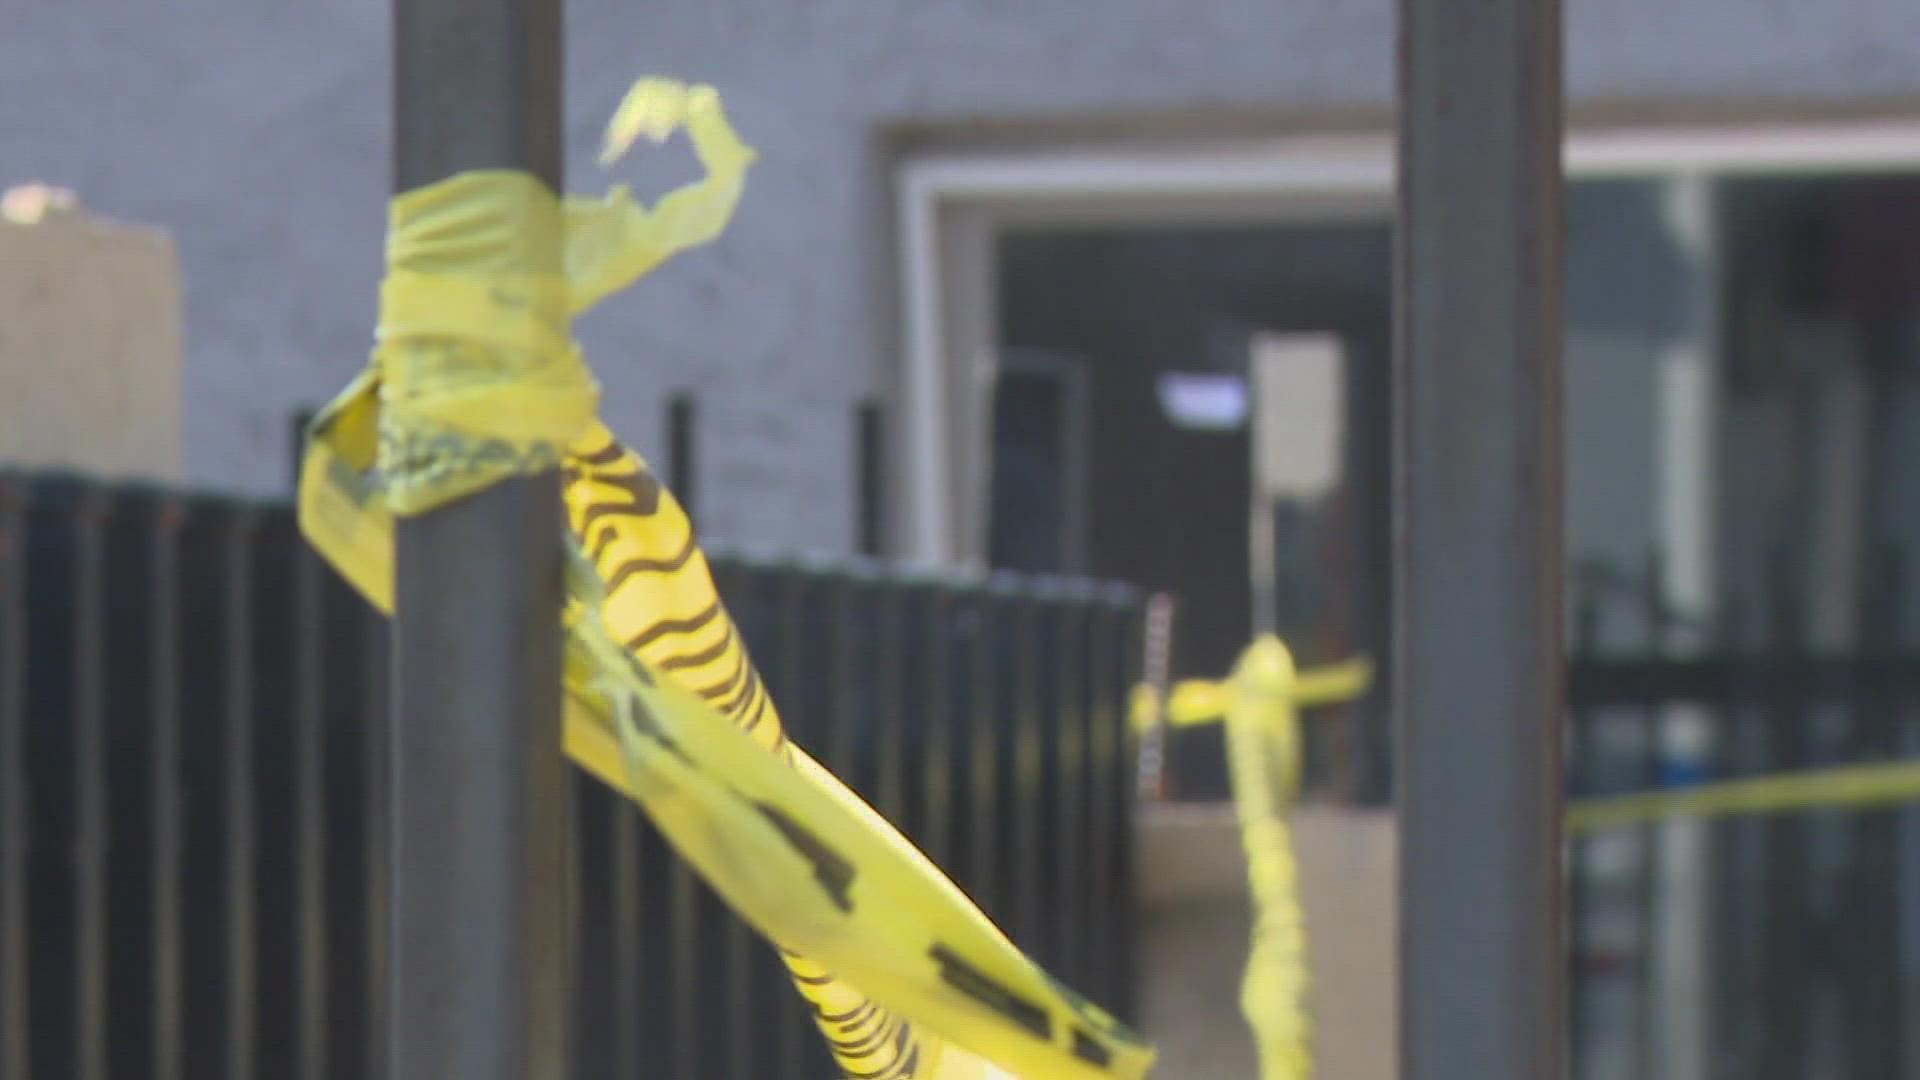 North Star Independent Living Services is at the center of a homicide investigation after a resident was shot and killed at one of its group homes in Phoenix.